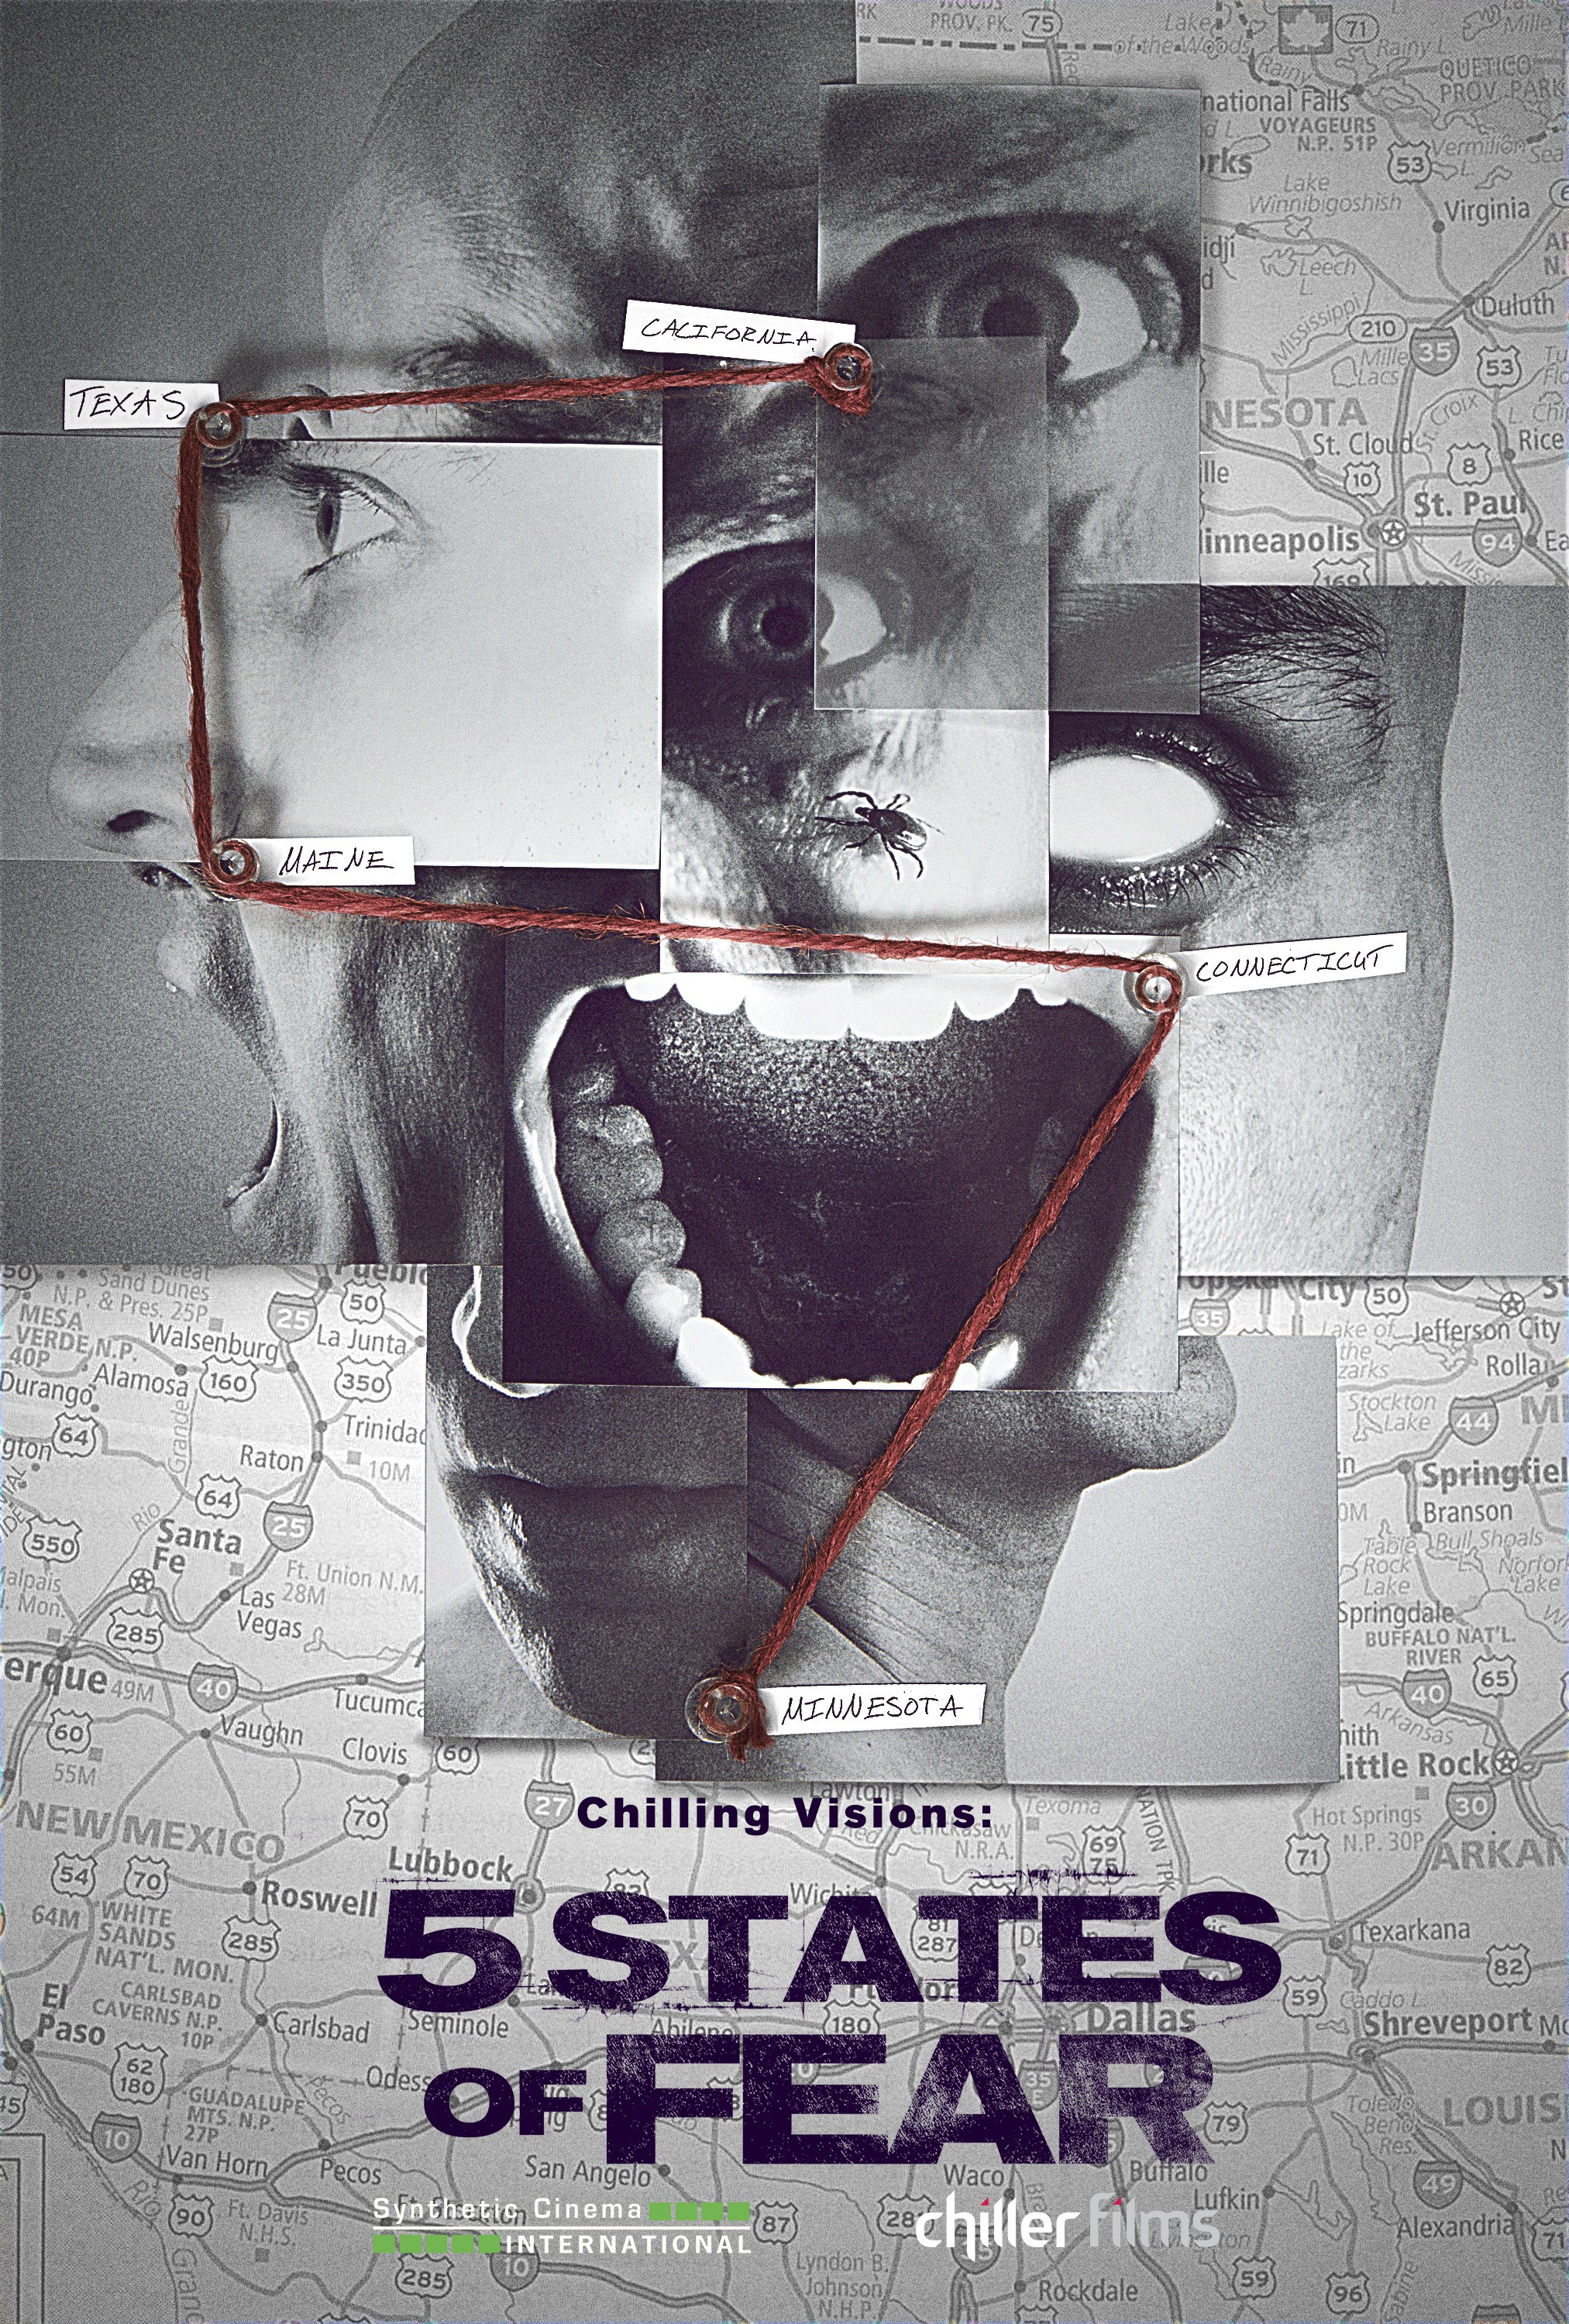 Mega Sized Movie Poster Image for Chilling Visions: 5 States of Fear 